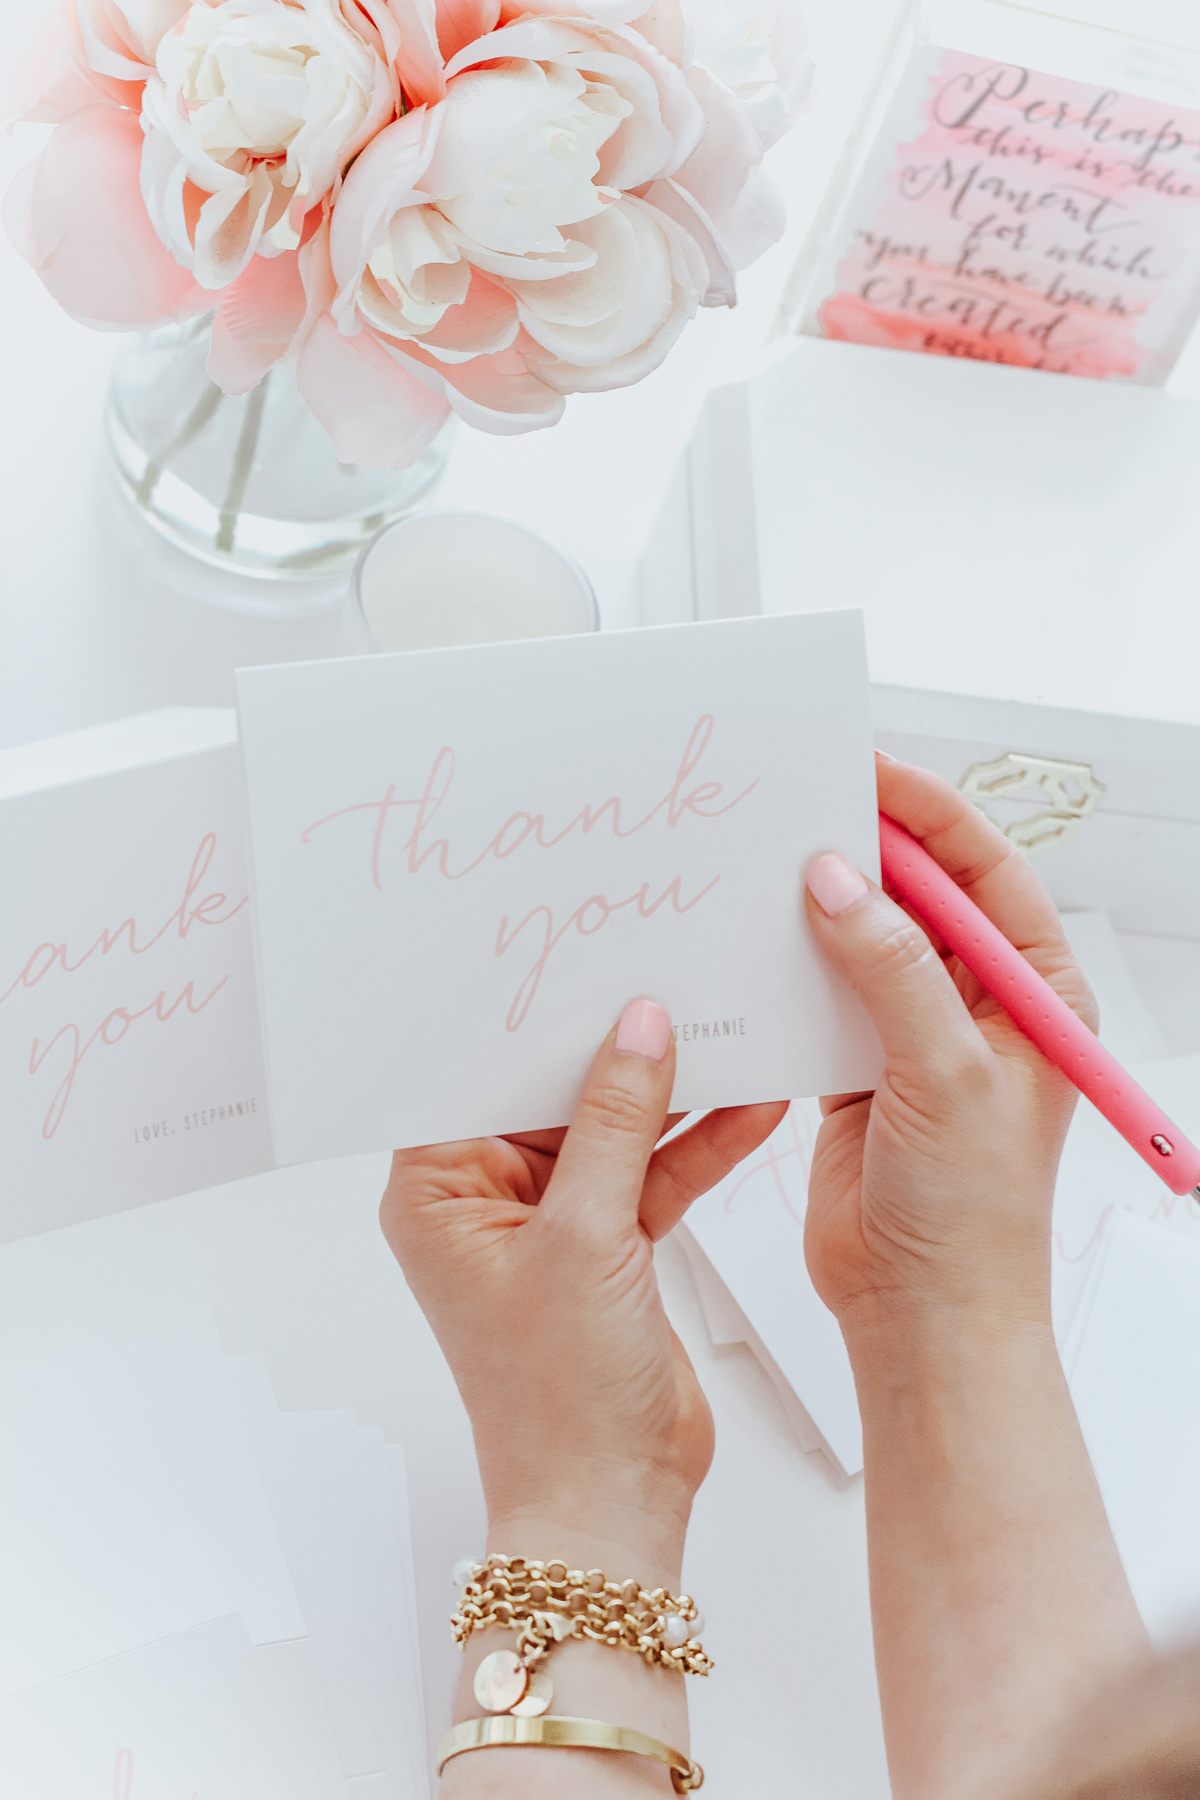 My New Thank You Notes from Basic Invite | Stephanie Pernas